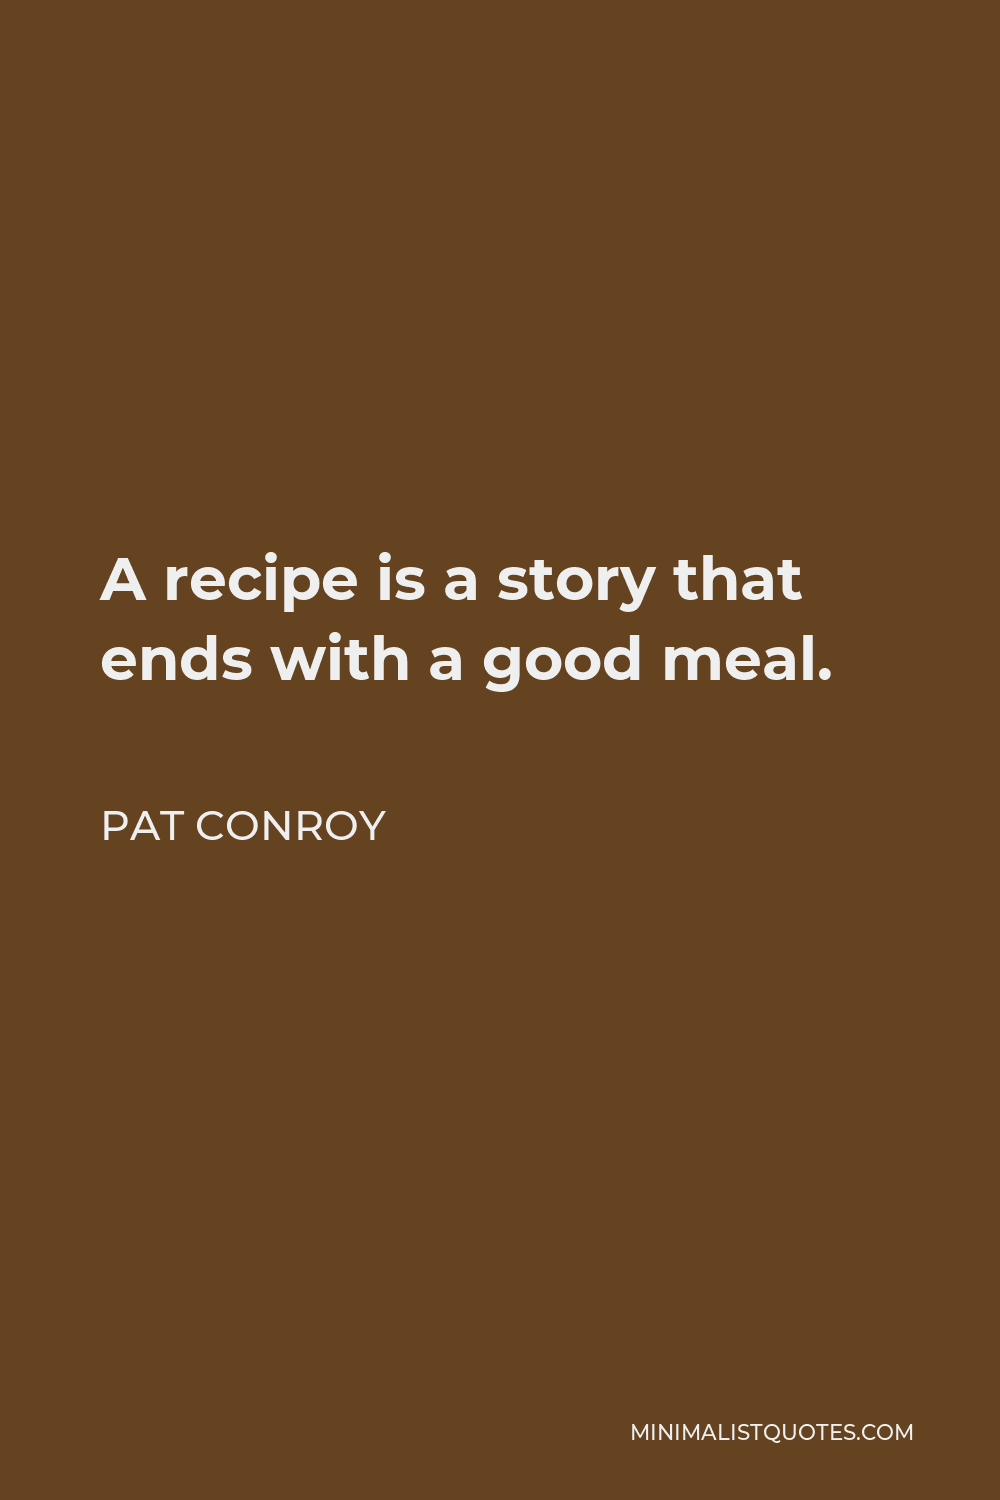 Pat Conroy Quote - A recipe is a story that ends with a good meal.